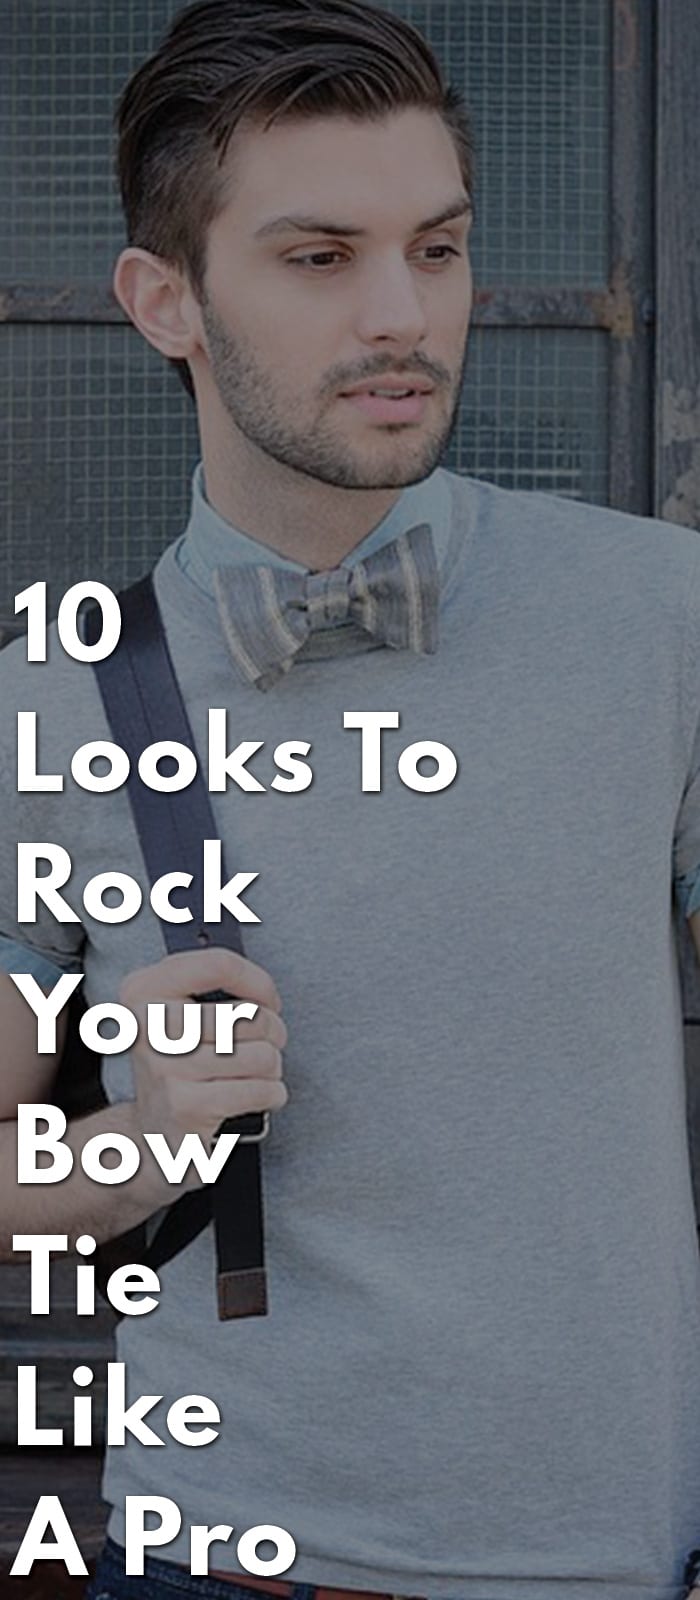 10-Looks-to-Rock-Your-Bow-Tie-Like-a-Pro